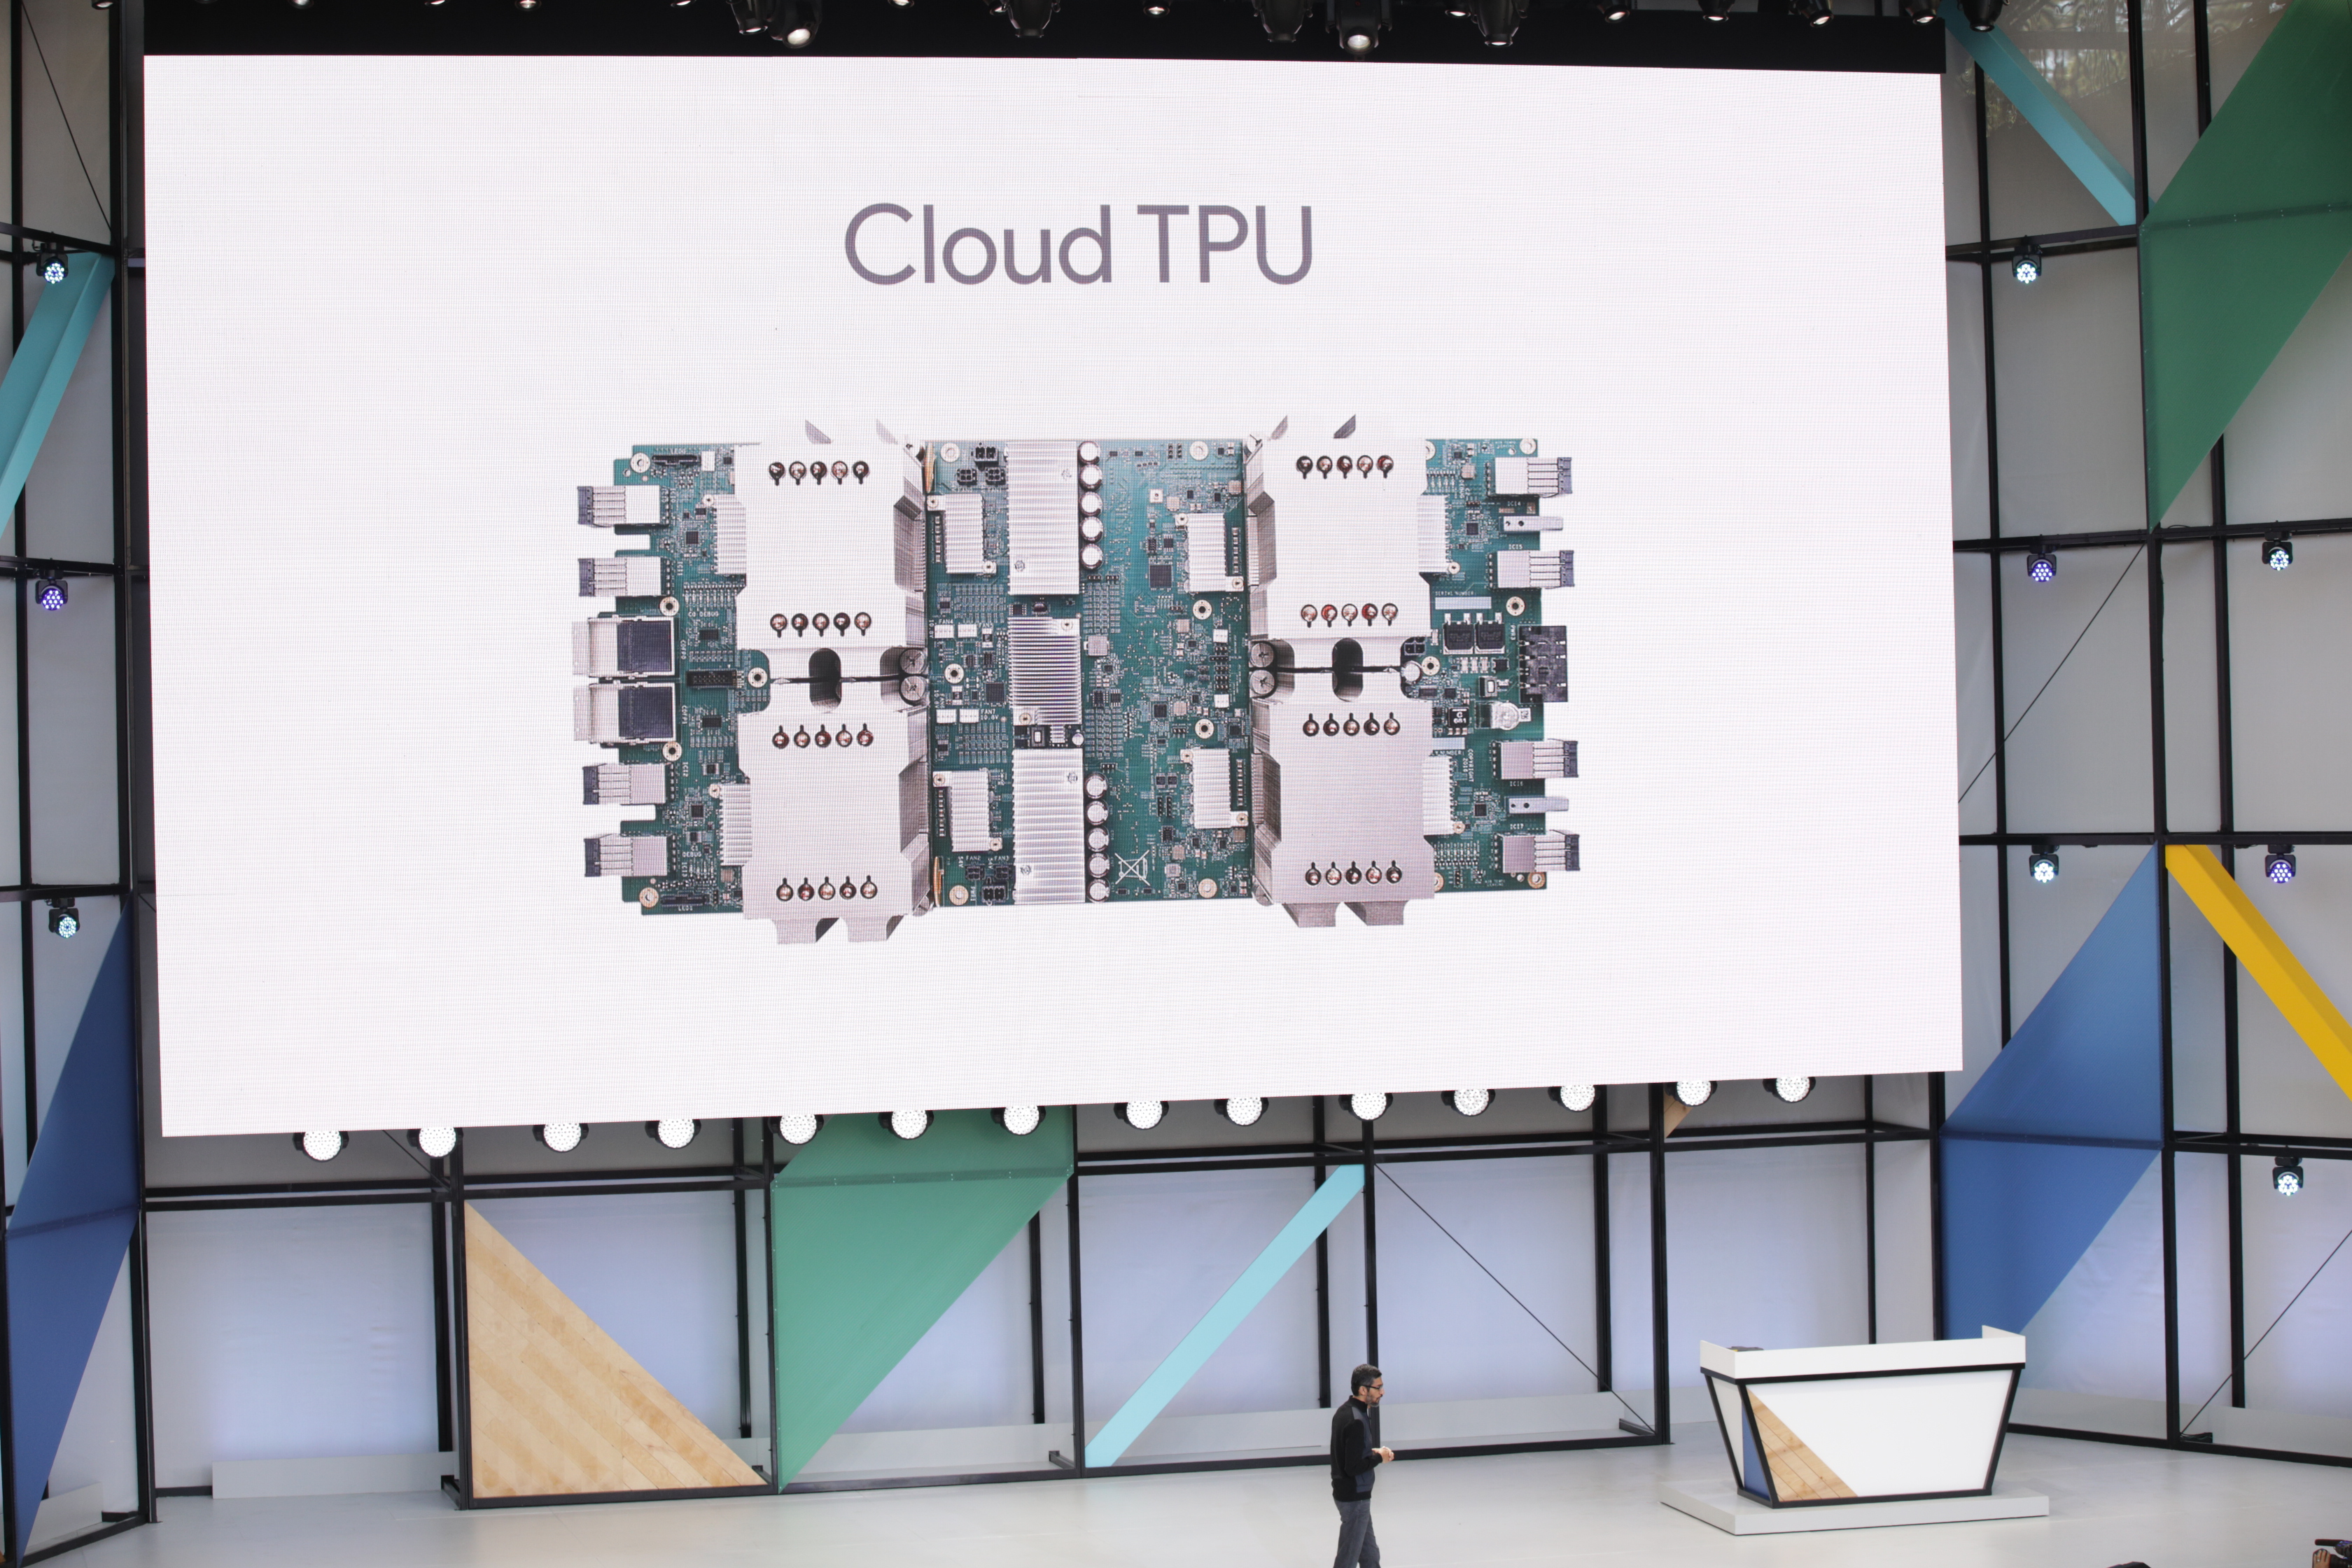 Google’s custom TPU machine learning accelerators are now available in beta